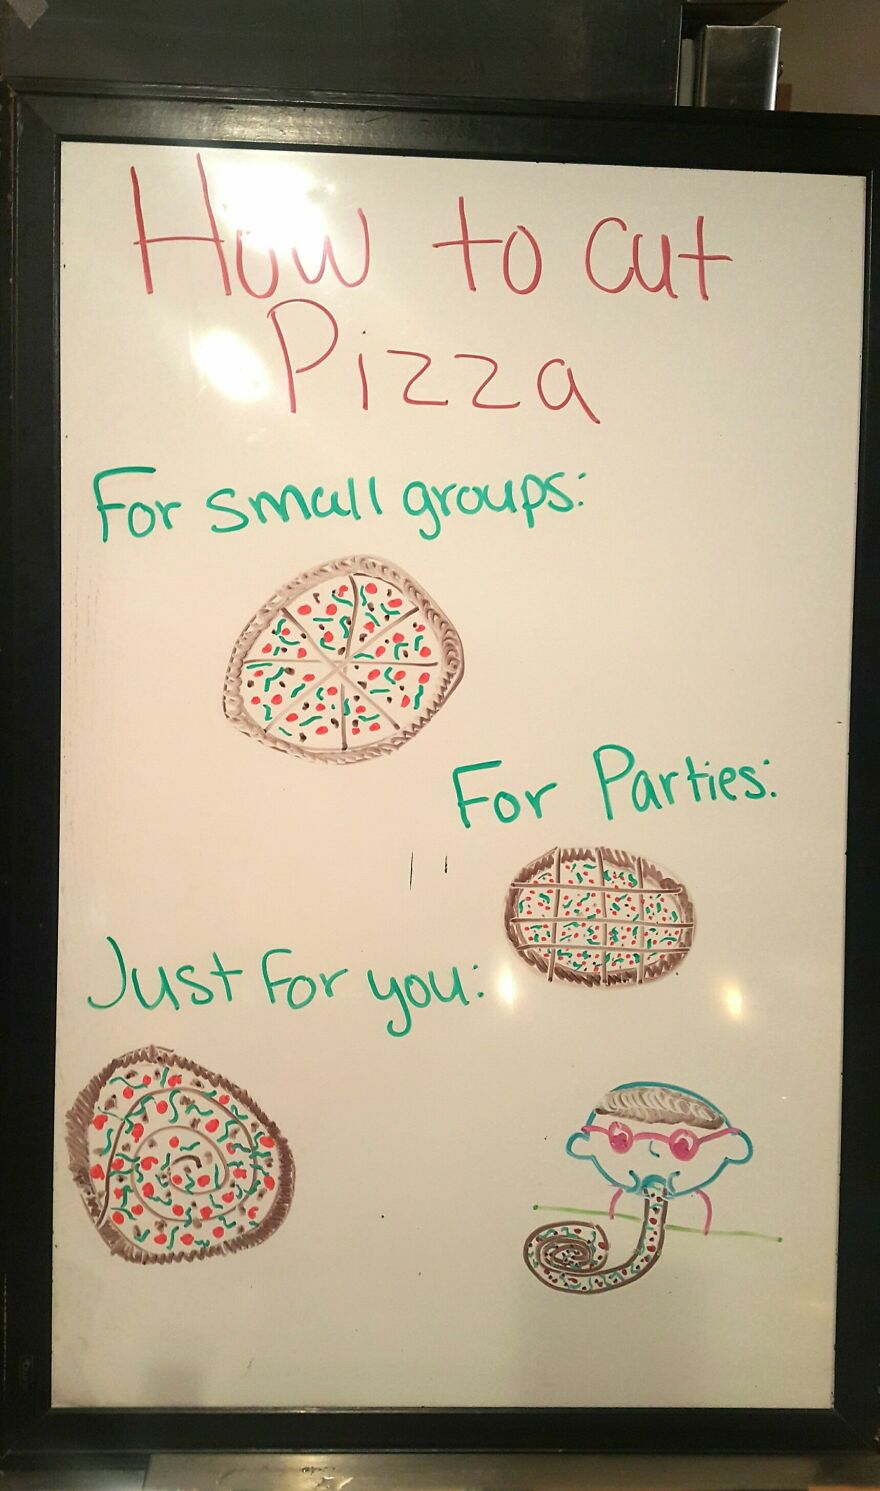 Our Local Pizza Place Gives Excellent Advice